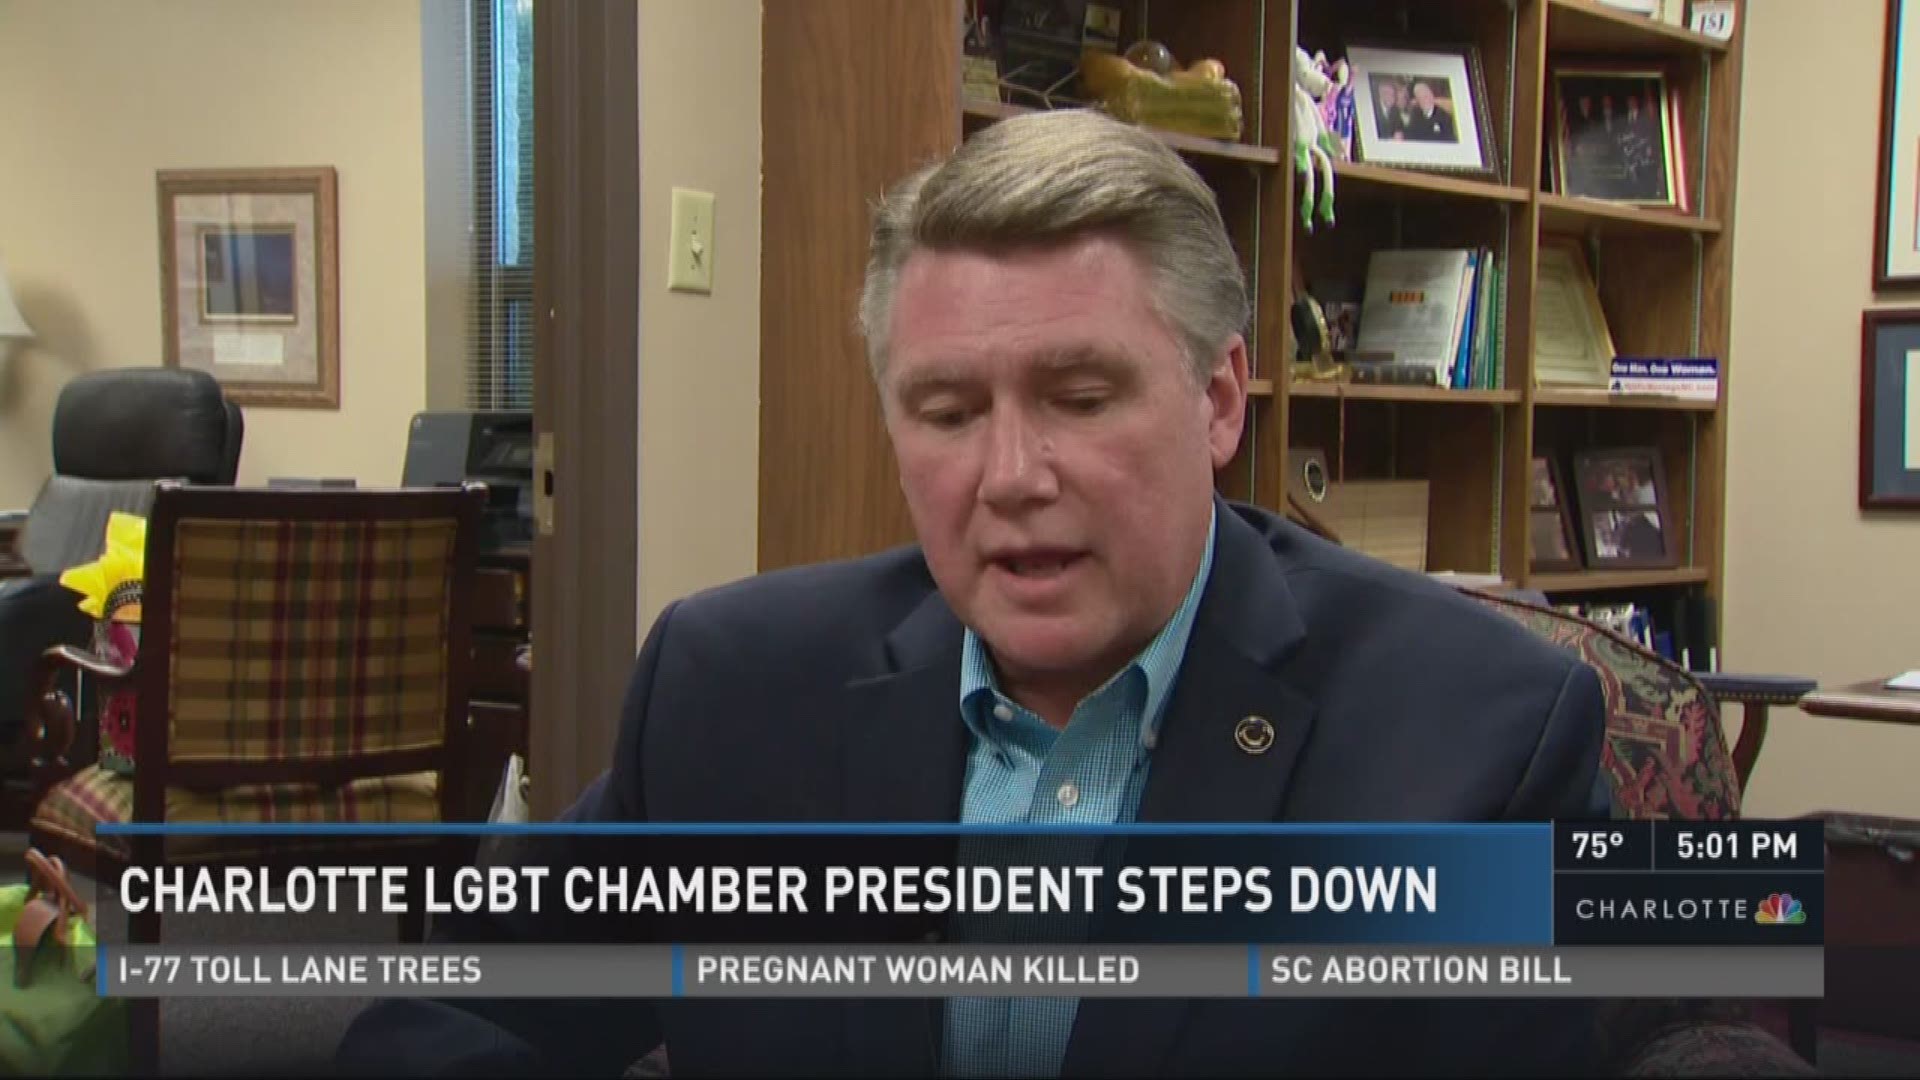 The President of the Charlotte LGBT Chamber stepped down after his registration as a sex offender came to light.